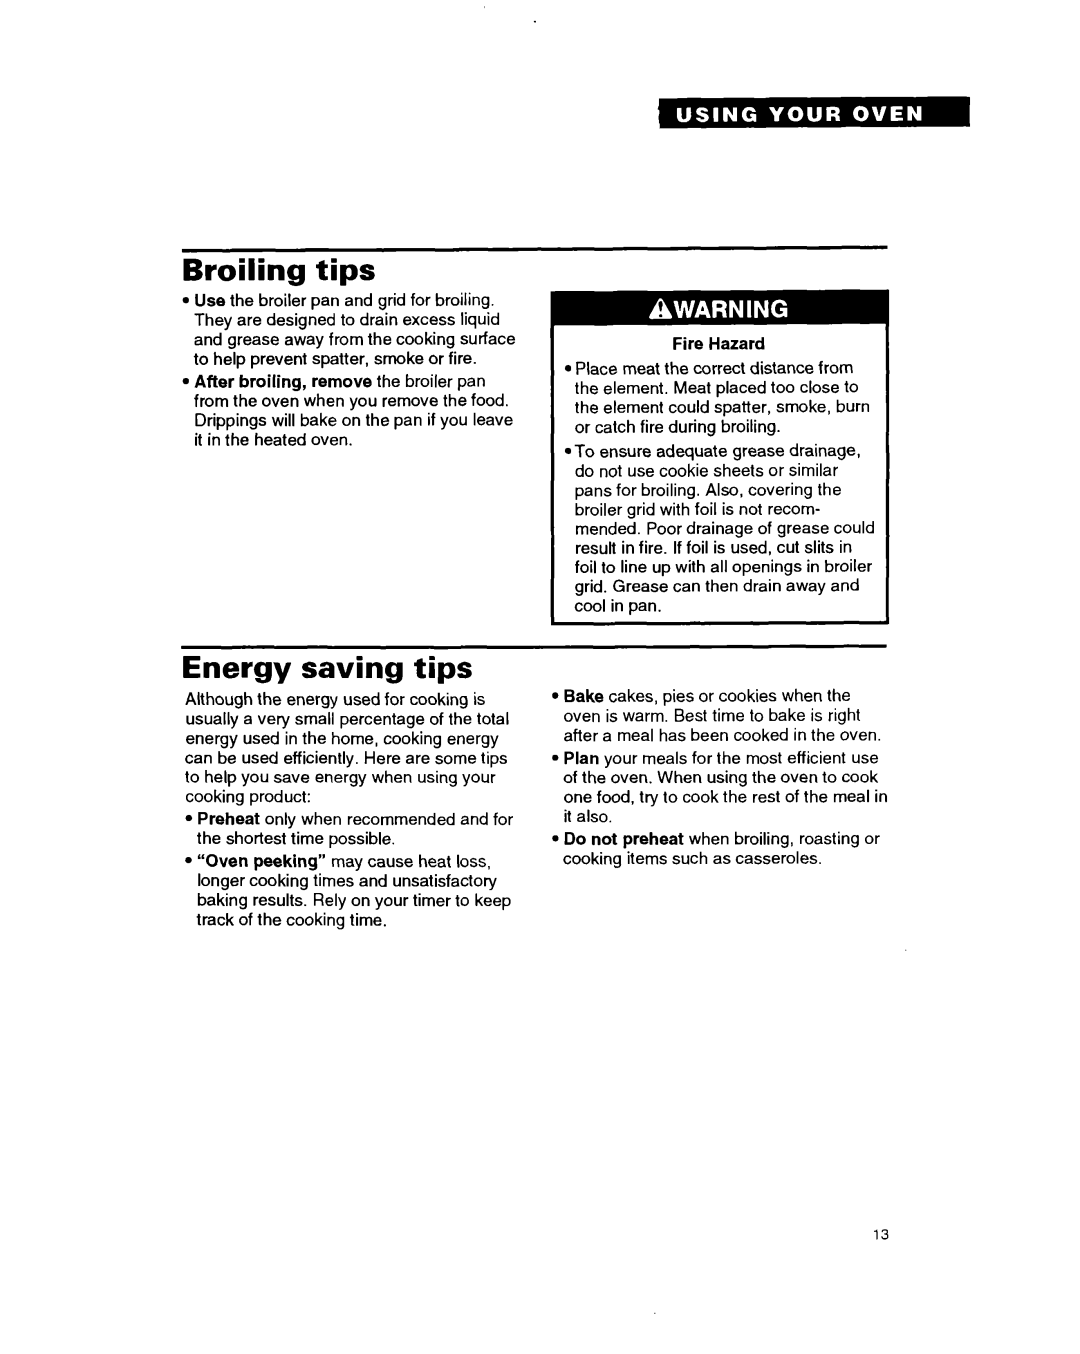 Whirlpool RB220PXB important safety instructions Broiling tips, Energy saving tips 